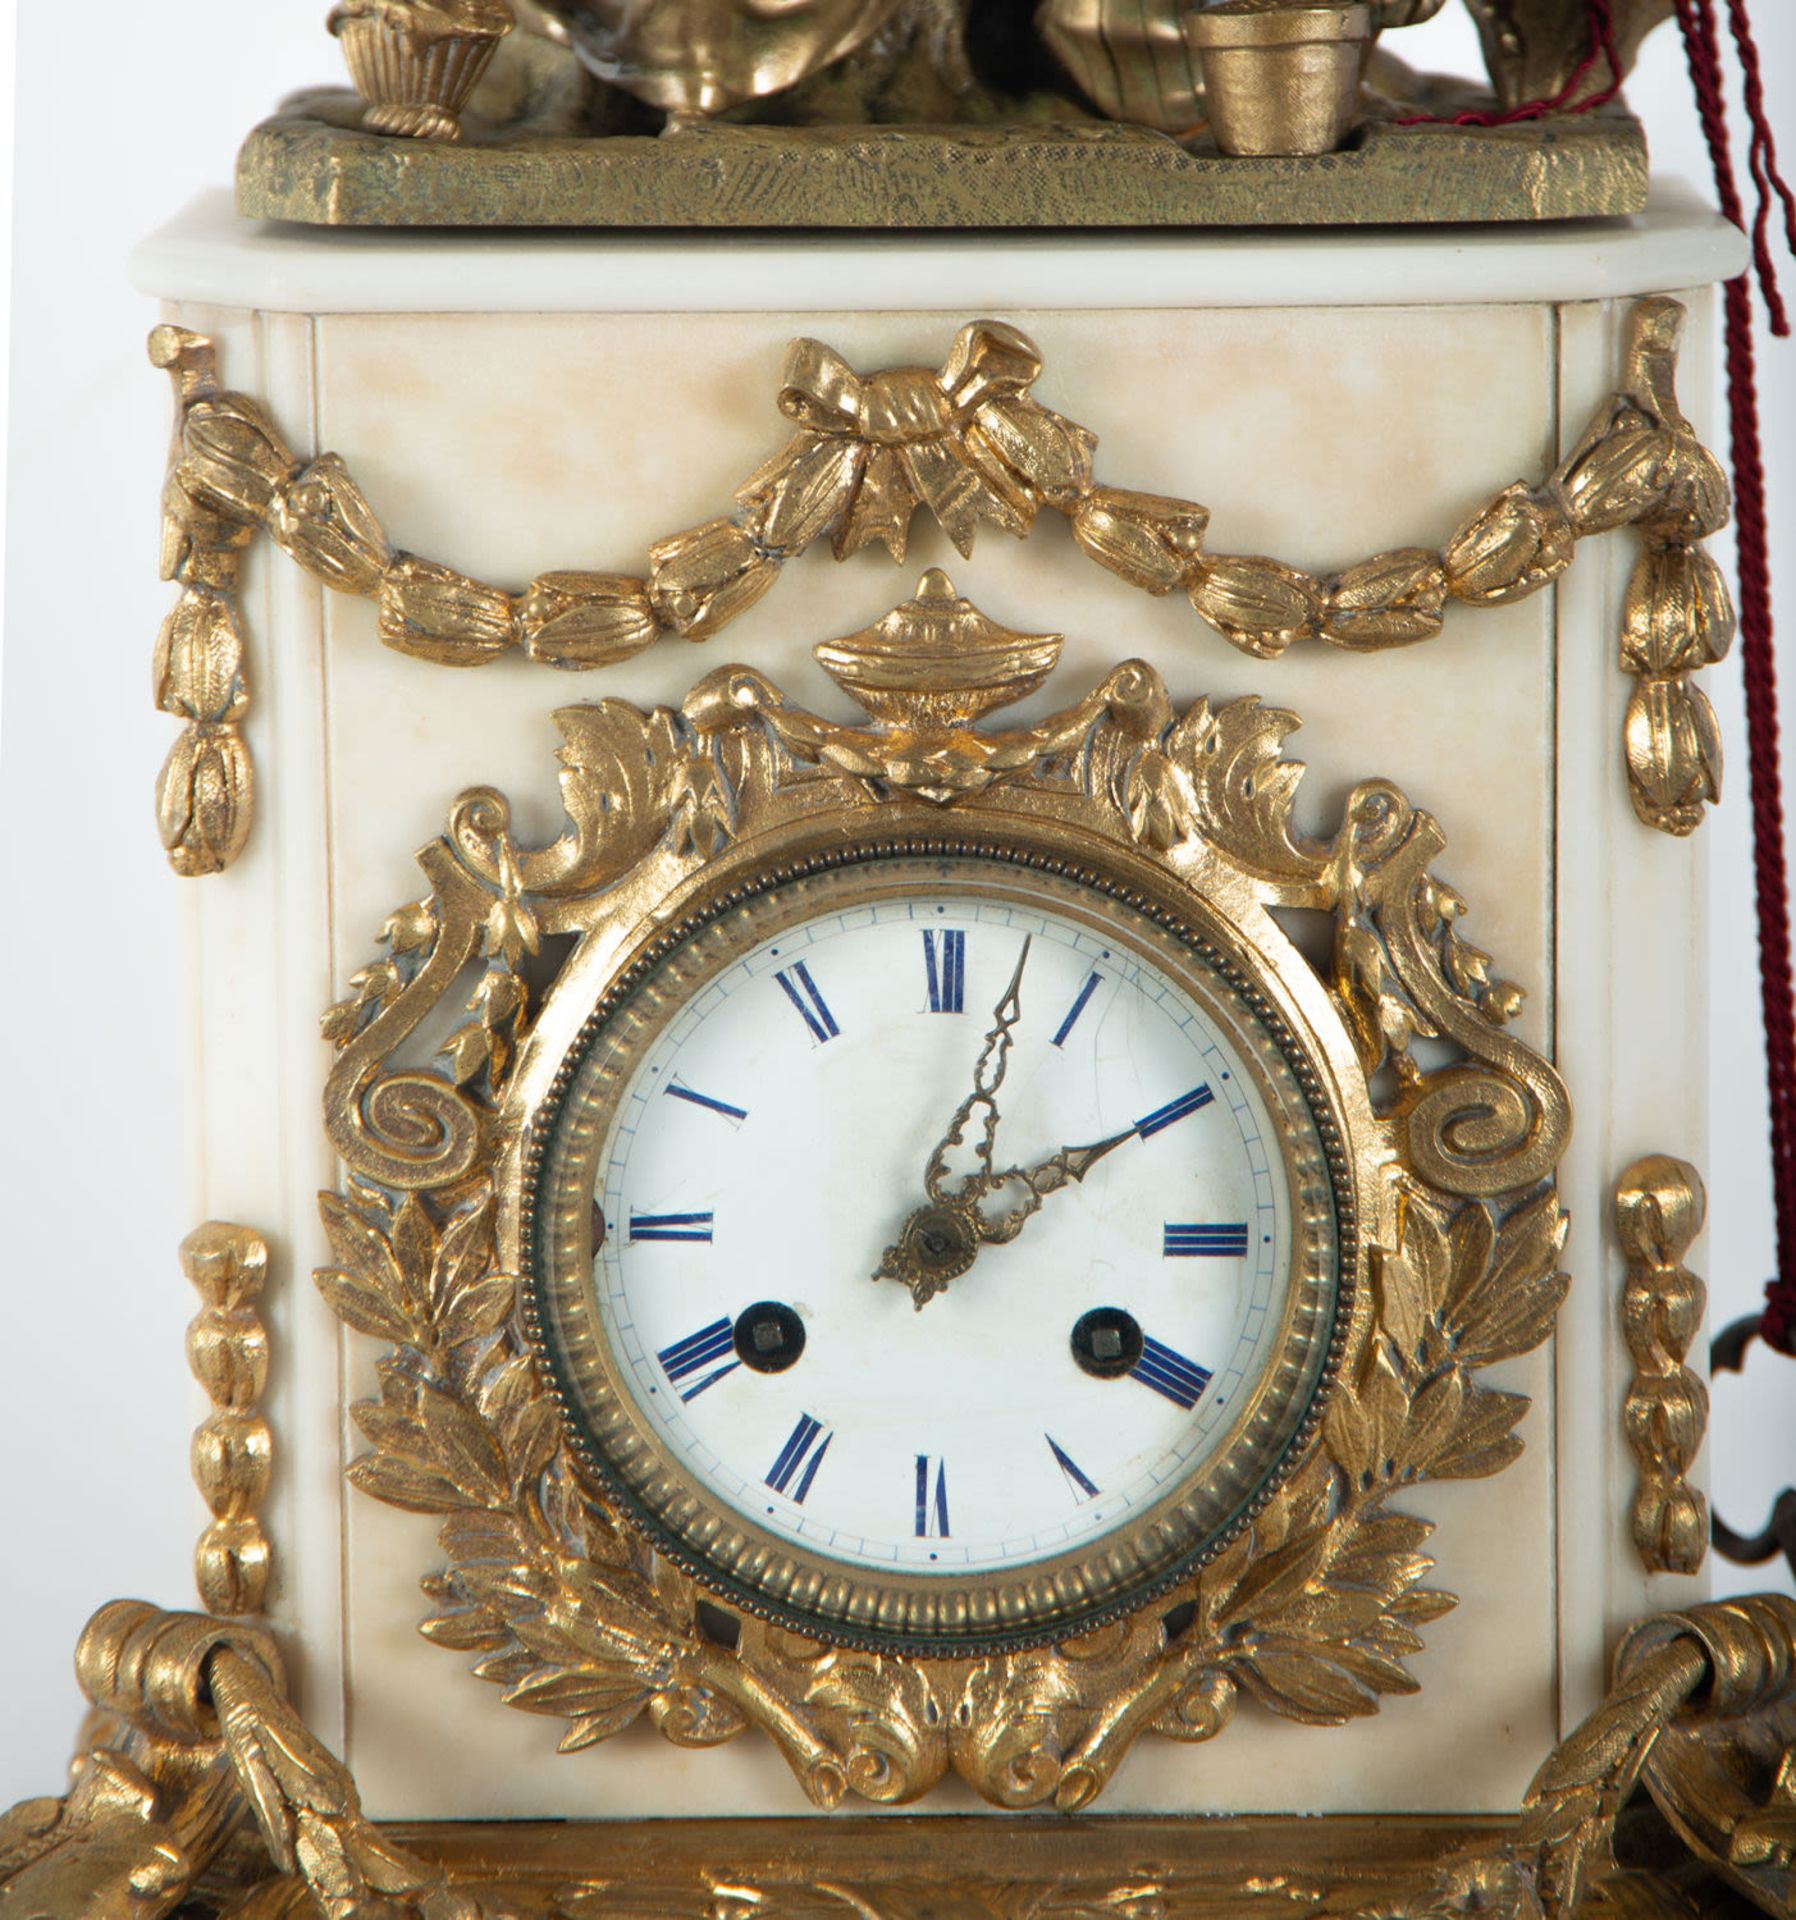 Bronze and marble clock depicting a couple watering pots, 19th century - Image 4 of 6